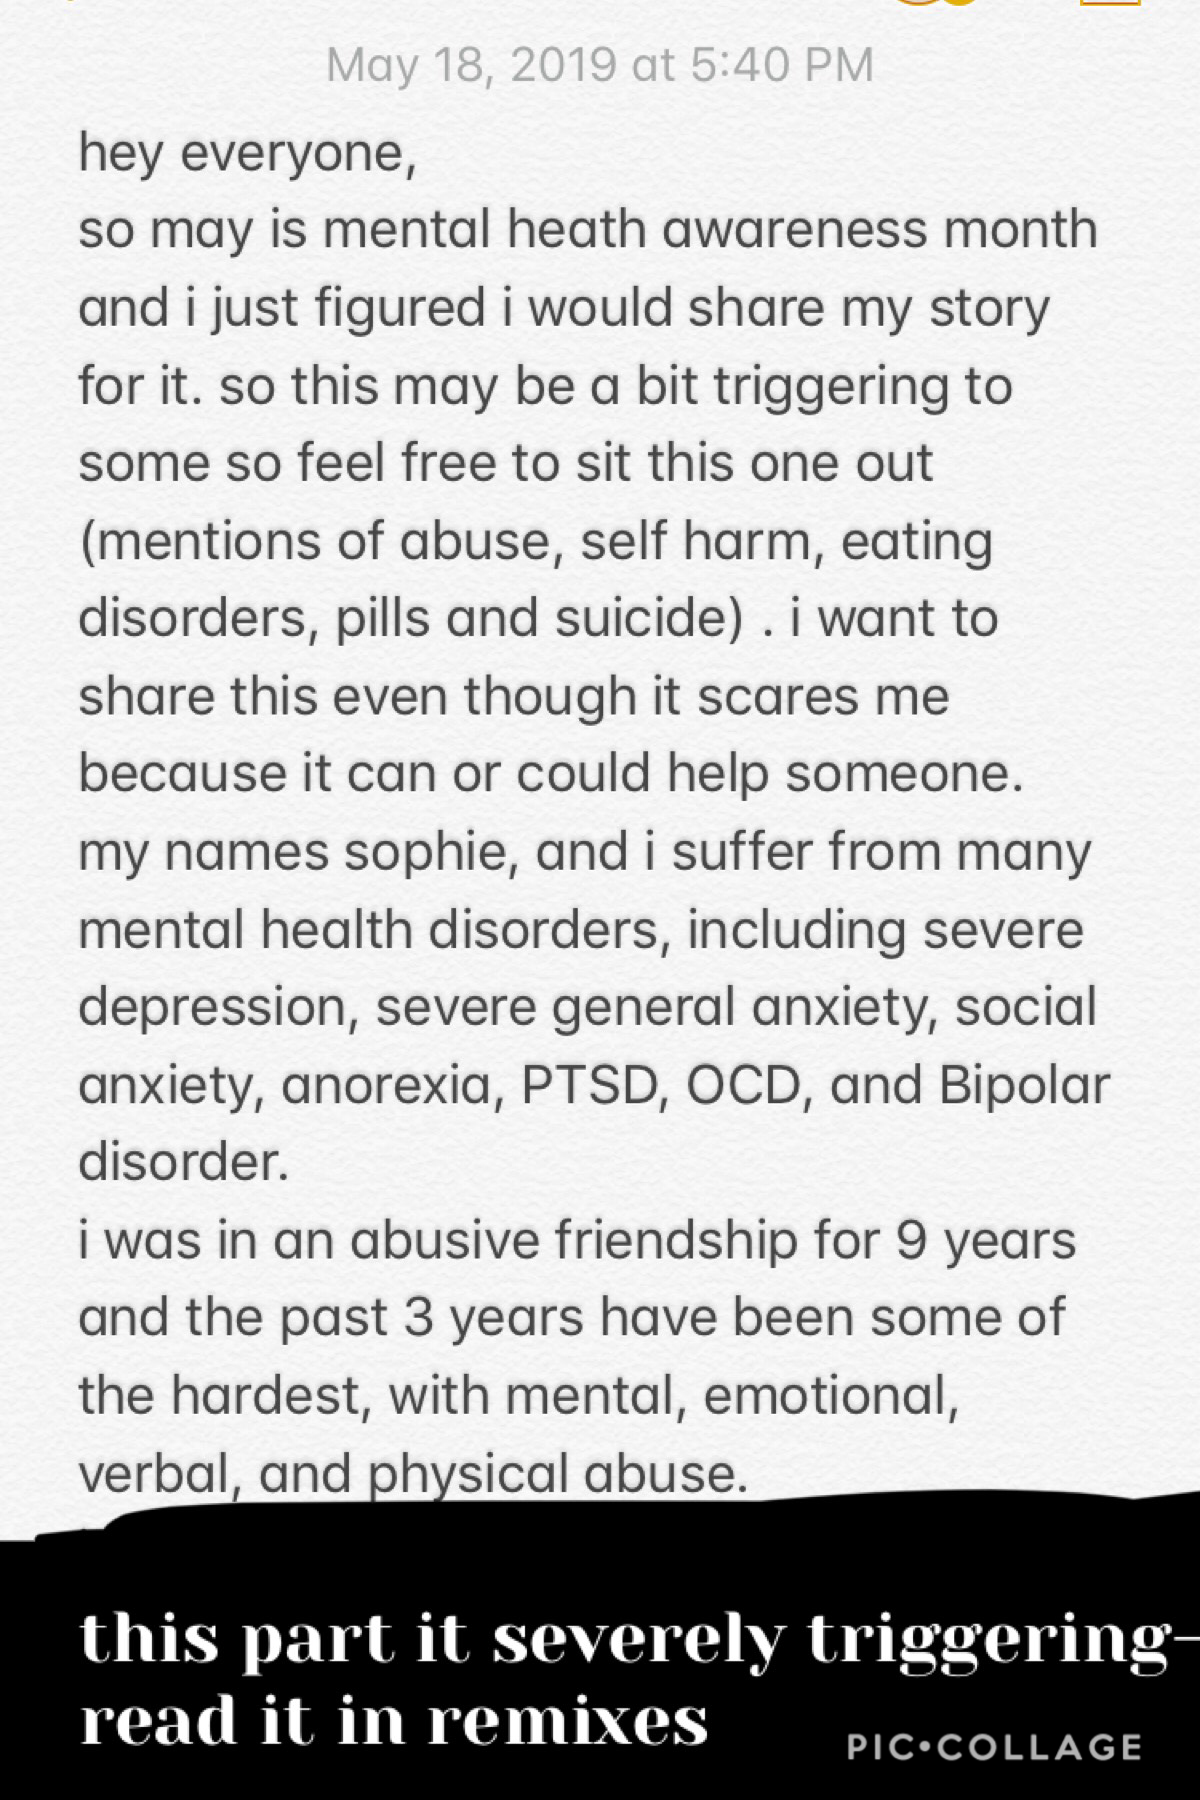 please feel free to talk about anything to me, 

if you need to text someone or call someone i will be here 

my number is +13179108850, please don’t abuse this please please please. my story continued in the remixes